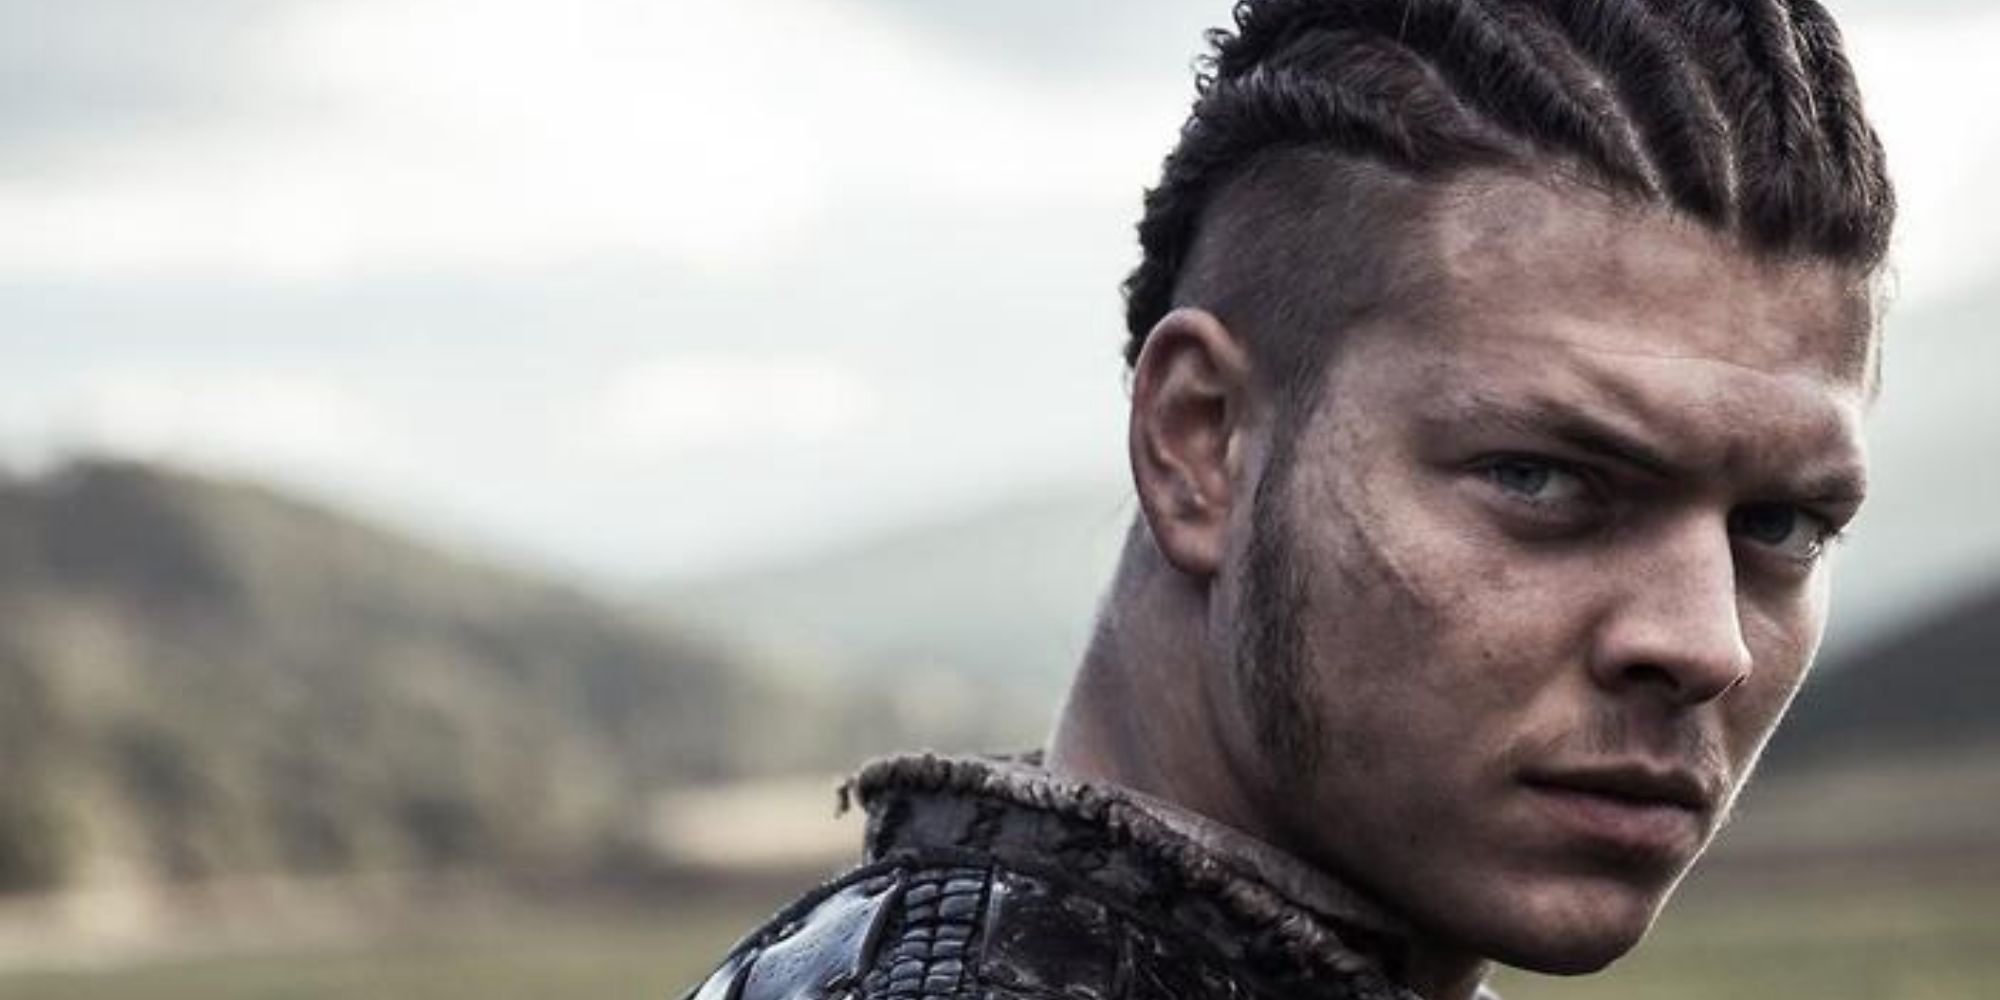 Ivar with cornrows staring into camera